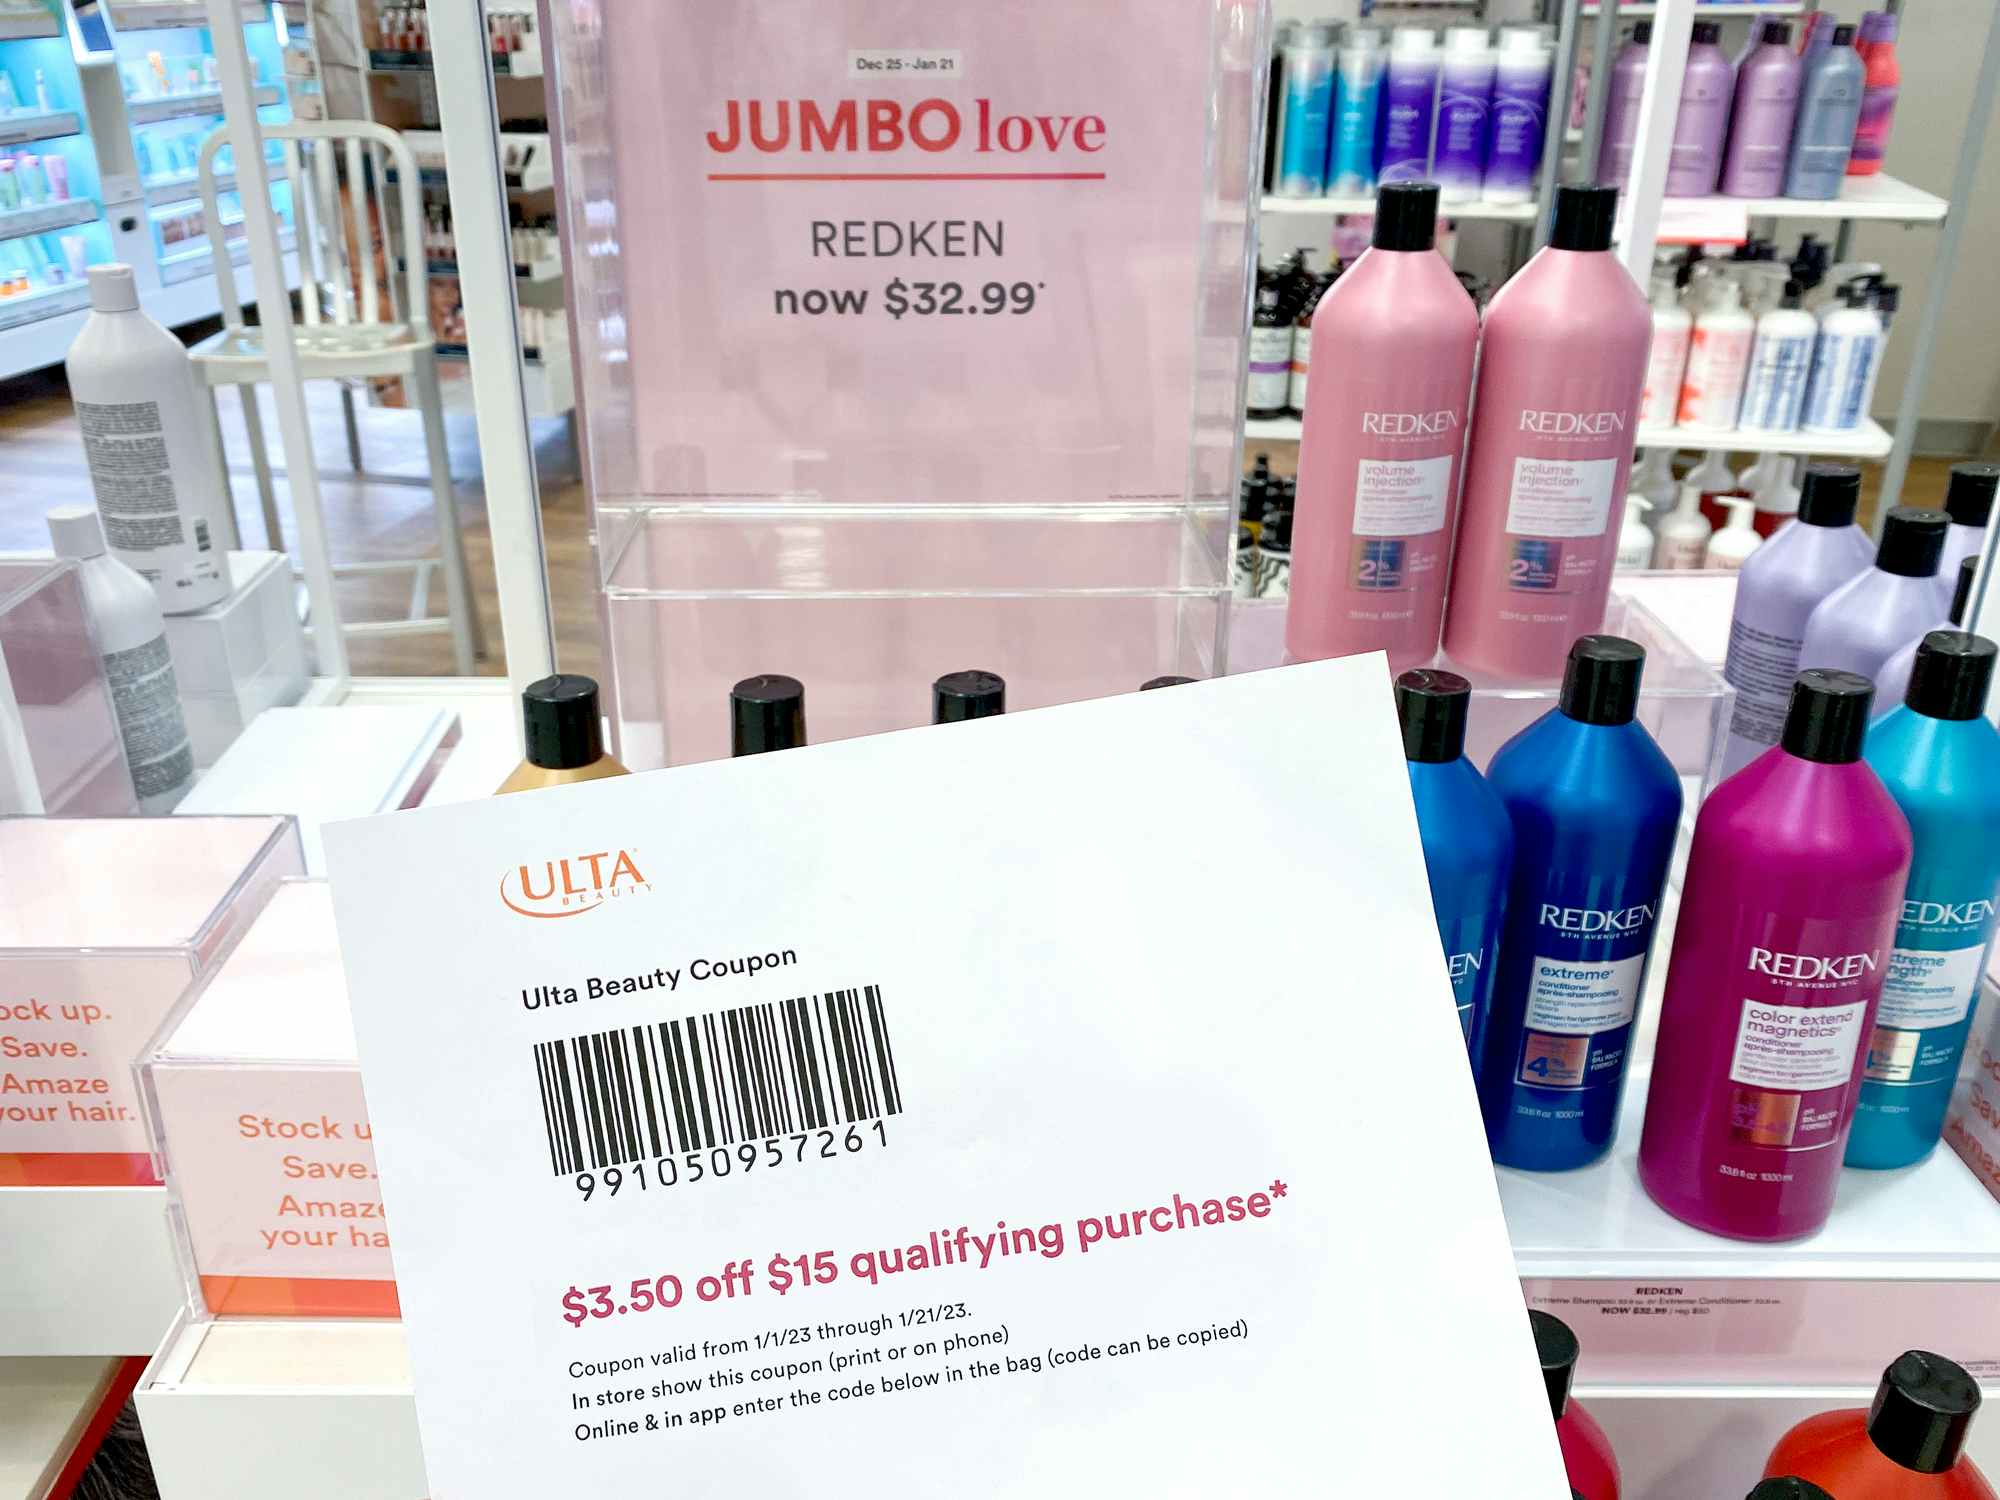 printed ulta coupon near jumbo love event signage and products 